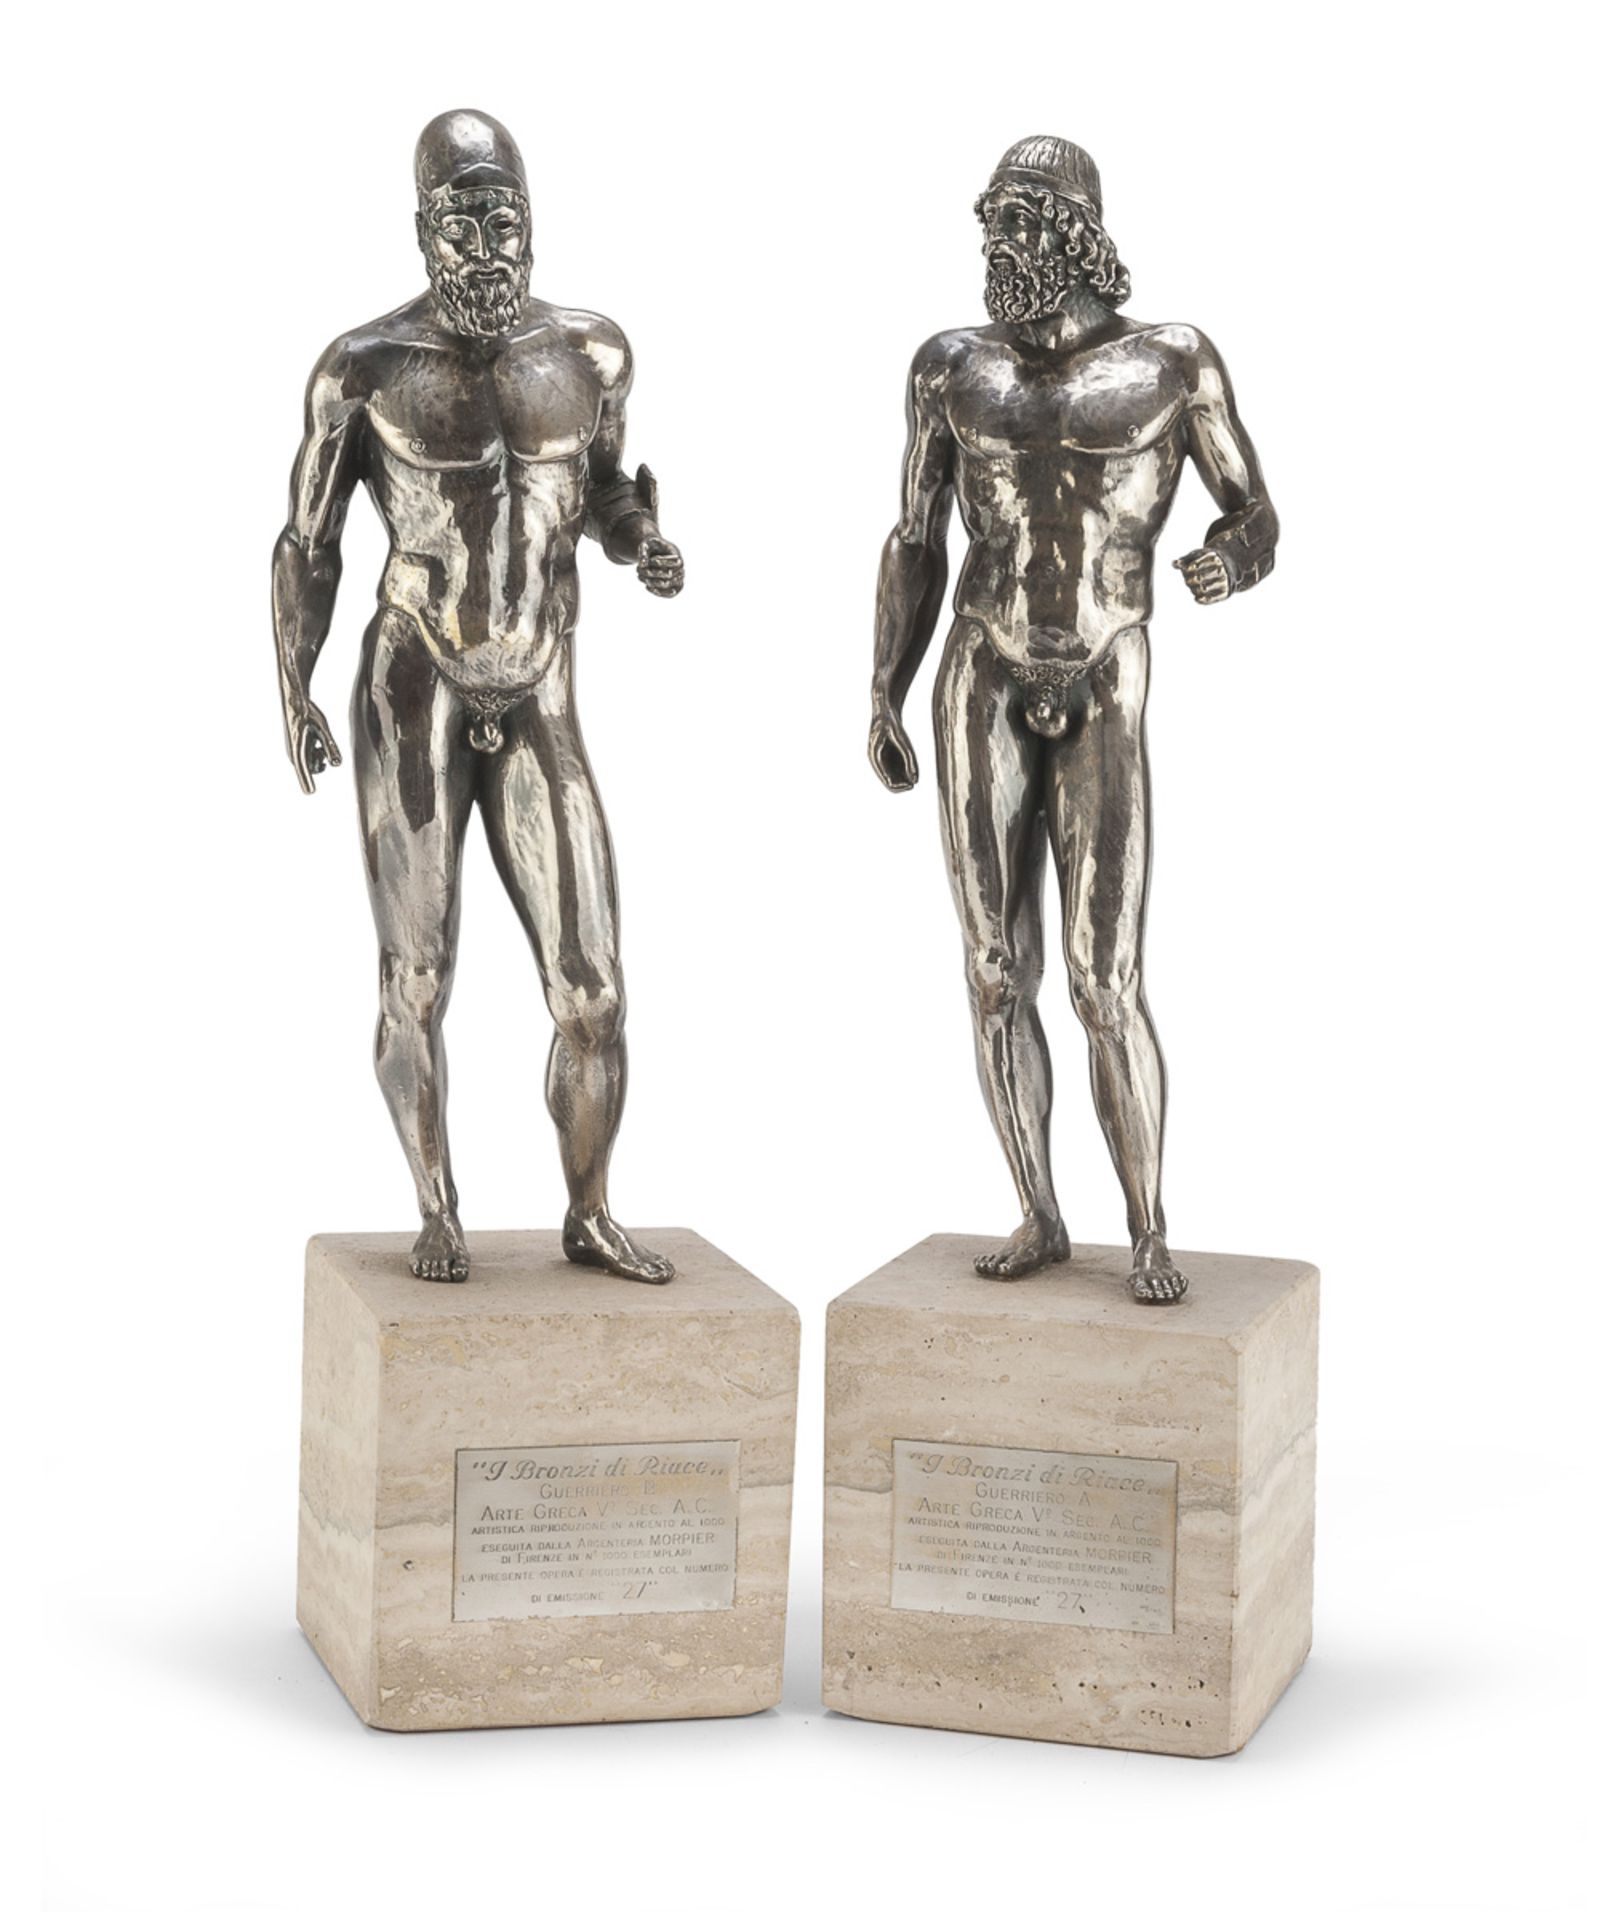 COPY OF MODELS OF THE RIACE BRONZES IN ISILVER FLORENCE POST 1968